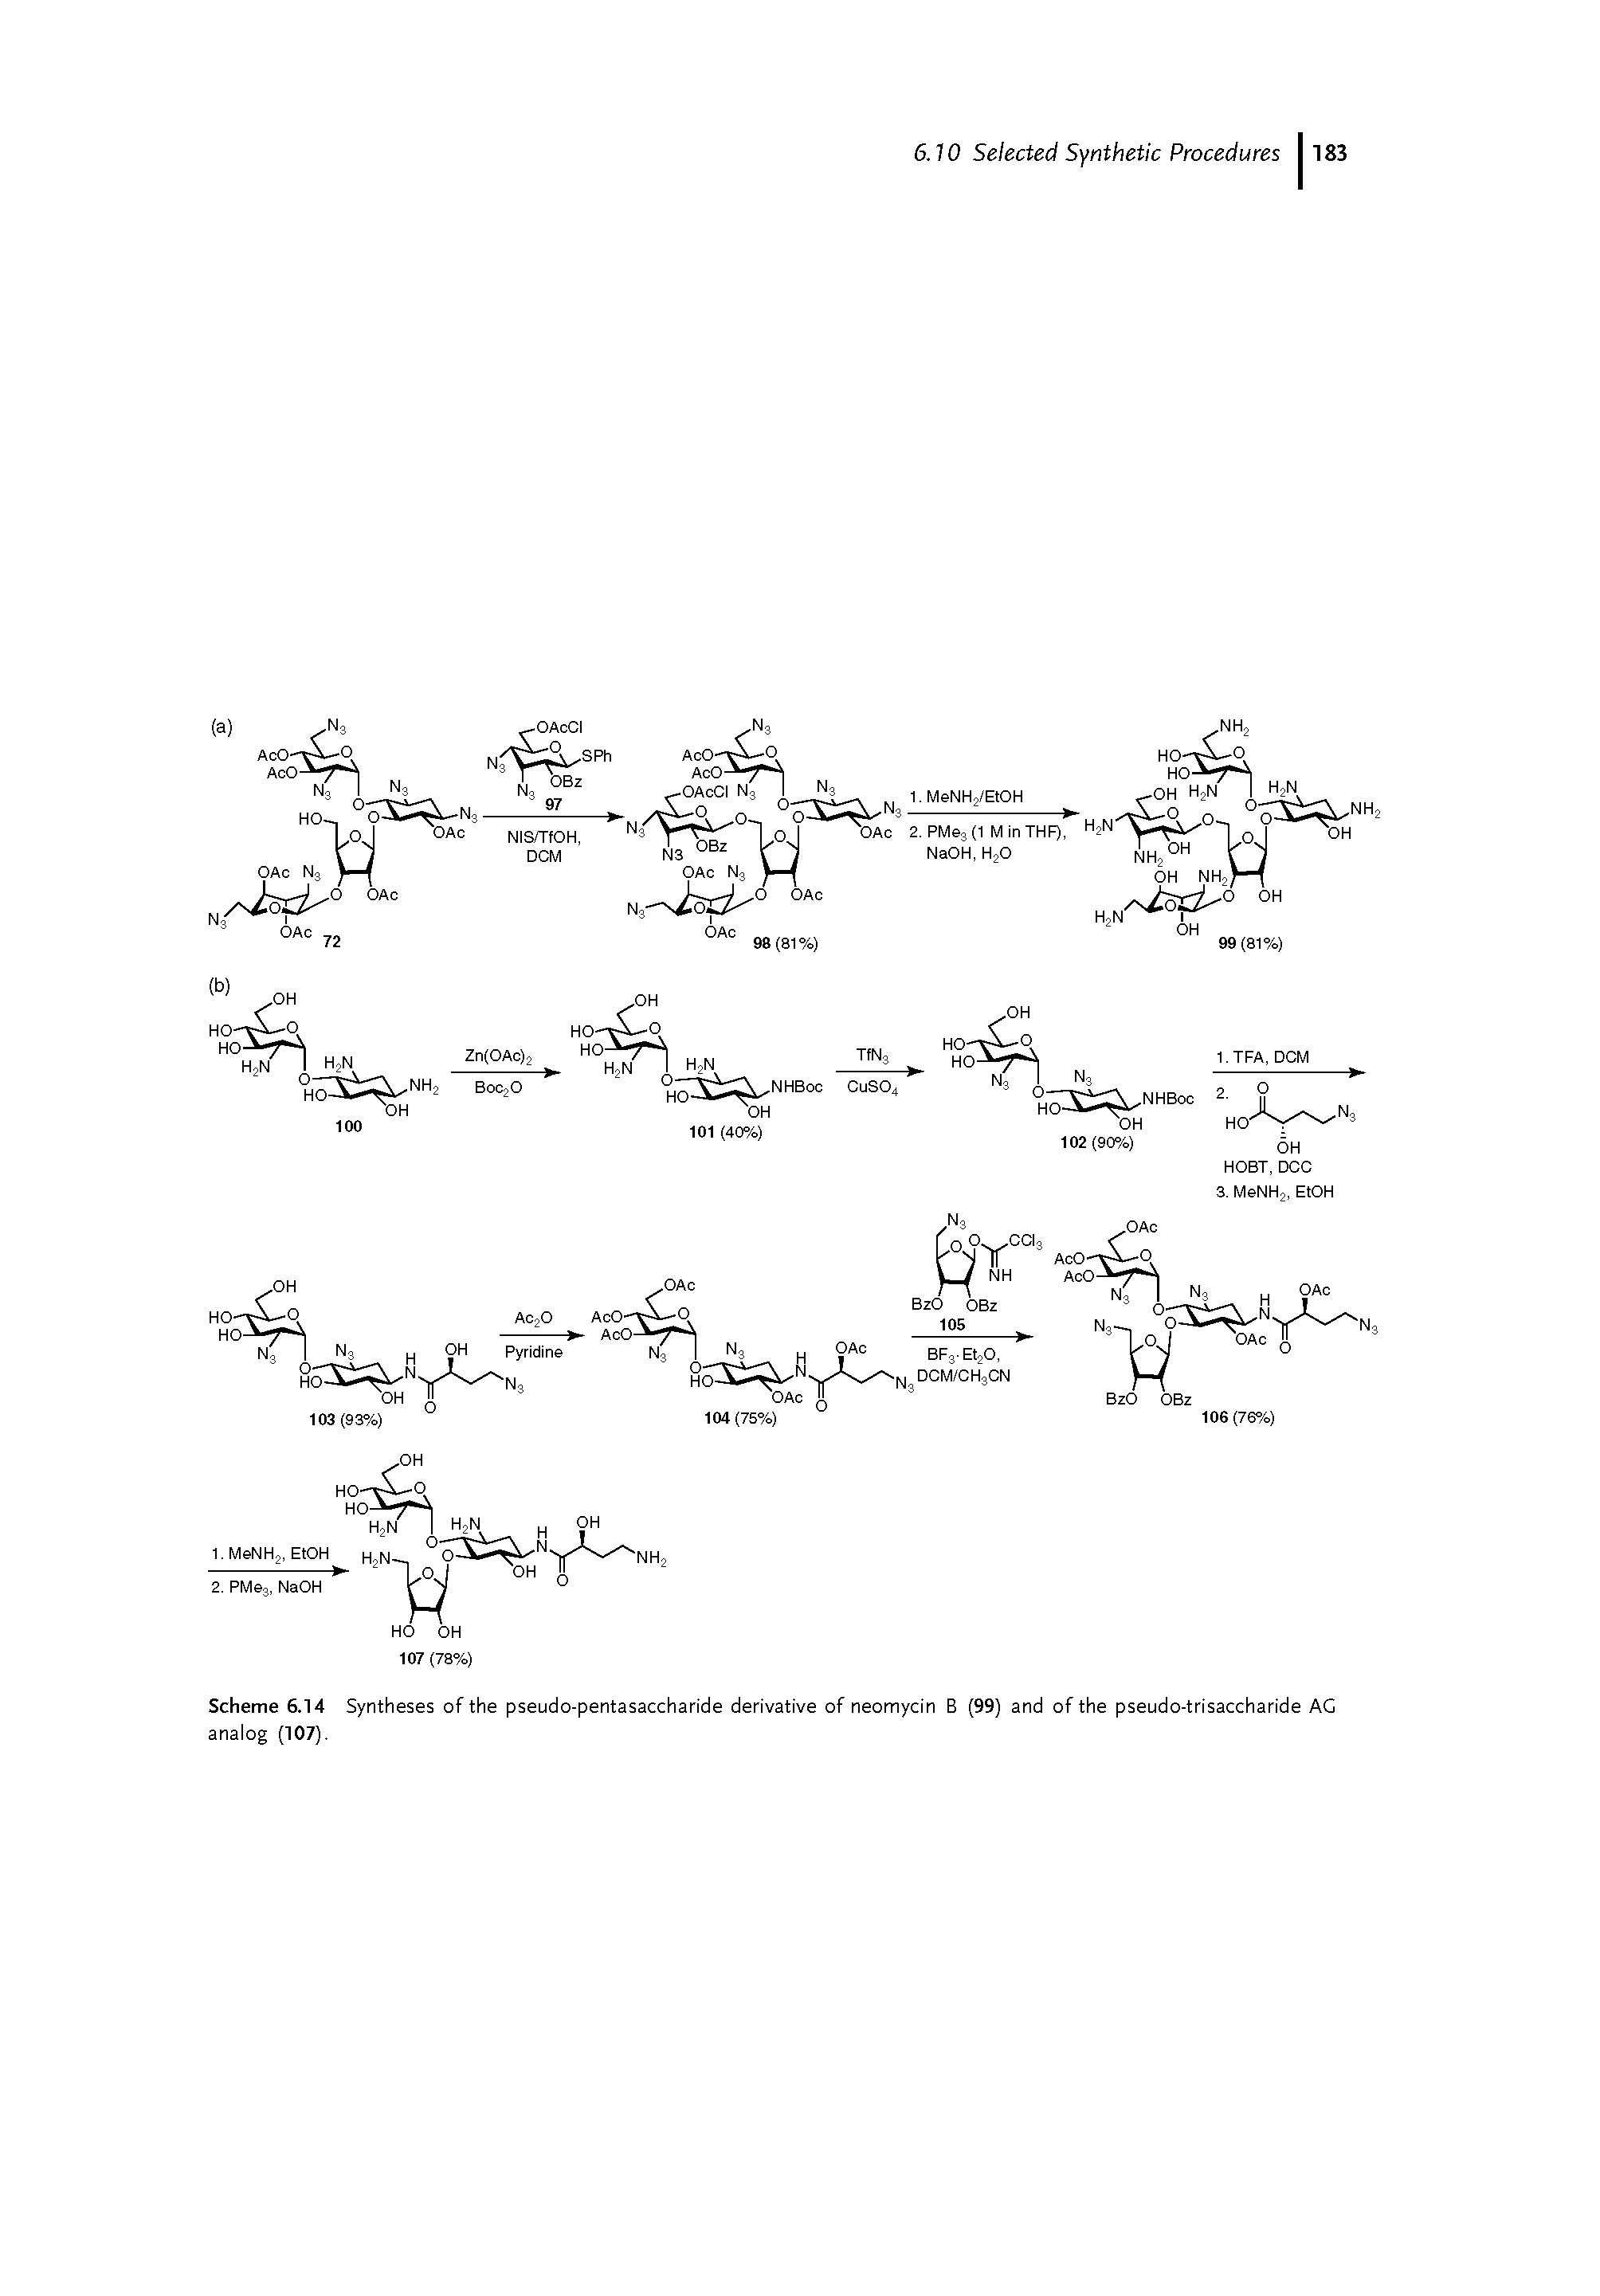 Scheme 6.14 Syntheses of the pseudo-pentasaccharide derivative of neomycin B (99) and of the pseudo-trisaccharide AG analog (107).